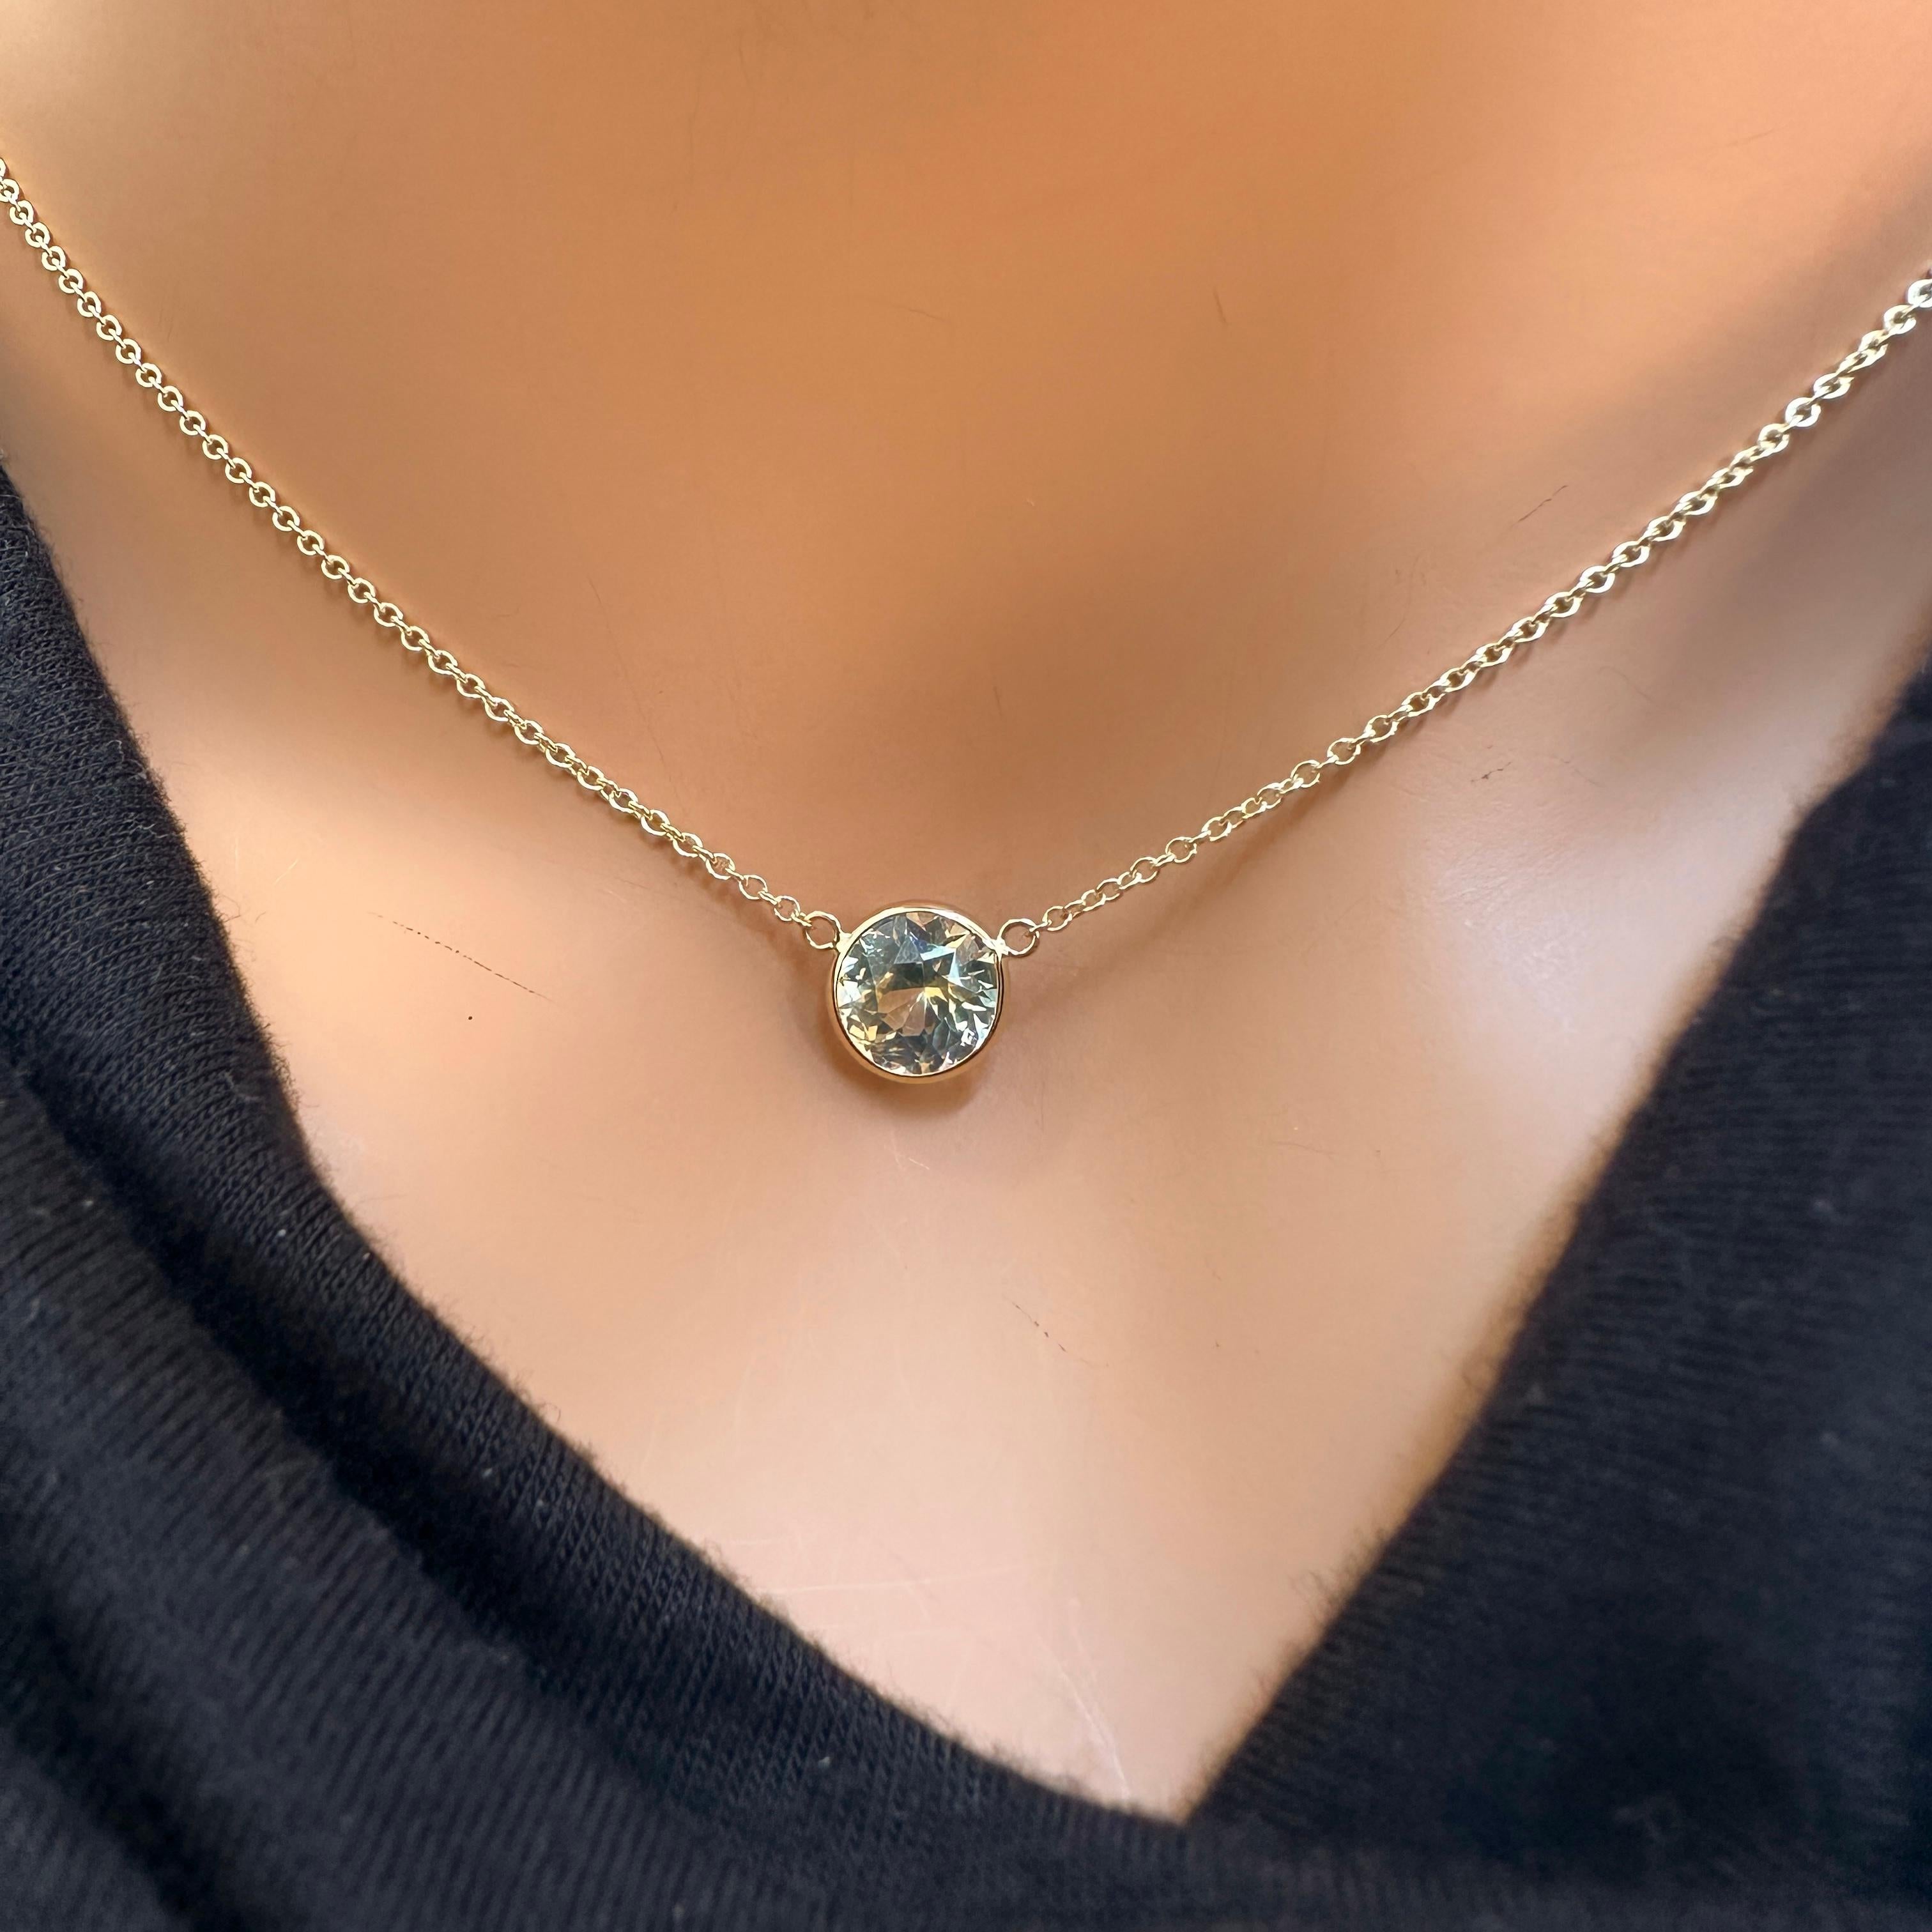 The bezel solitaire necklace combines vintage-inspired detail and modern appeal together for a look that’s timelessly elegant, simple, and classy. Each 14k solid gold bezel setting is hand-wrapped. We've built the necklace for versatility as the